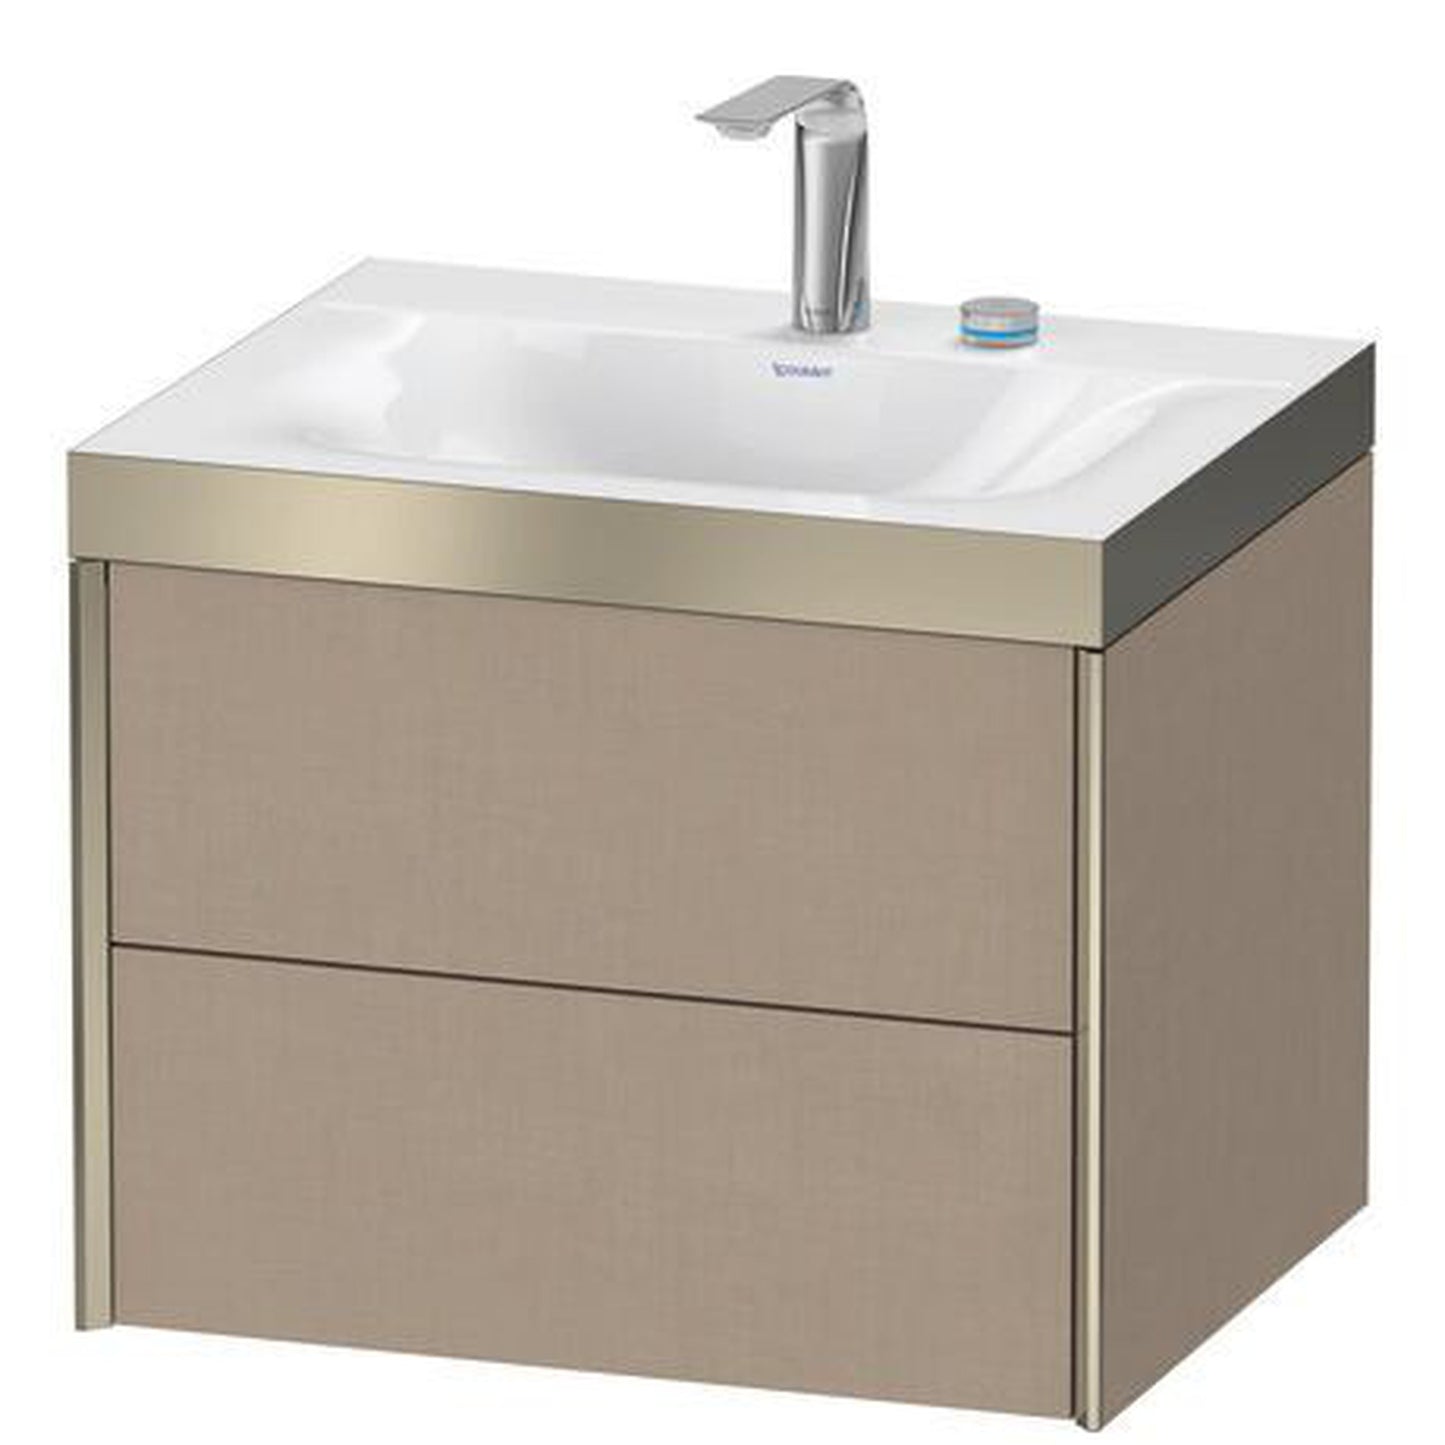 Duravit Xviu 24" x 20" x 19" Two Drawer C-Bonded Wall-Mount Vanity Kit With Two Tap Holes, Linen (XV4614EB175P)